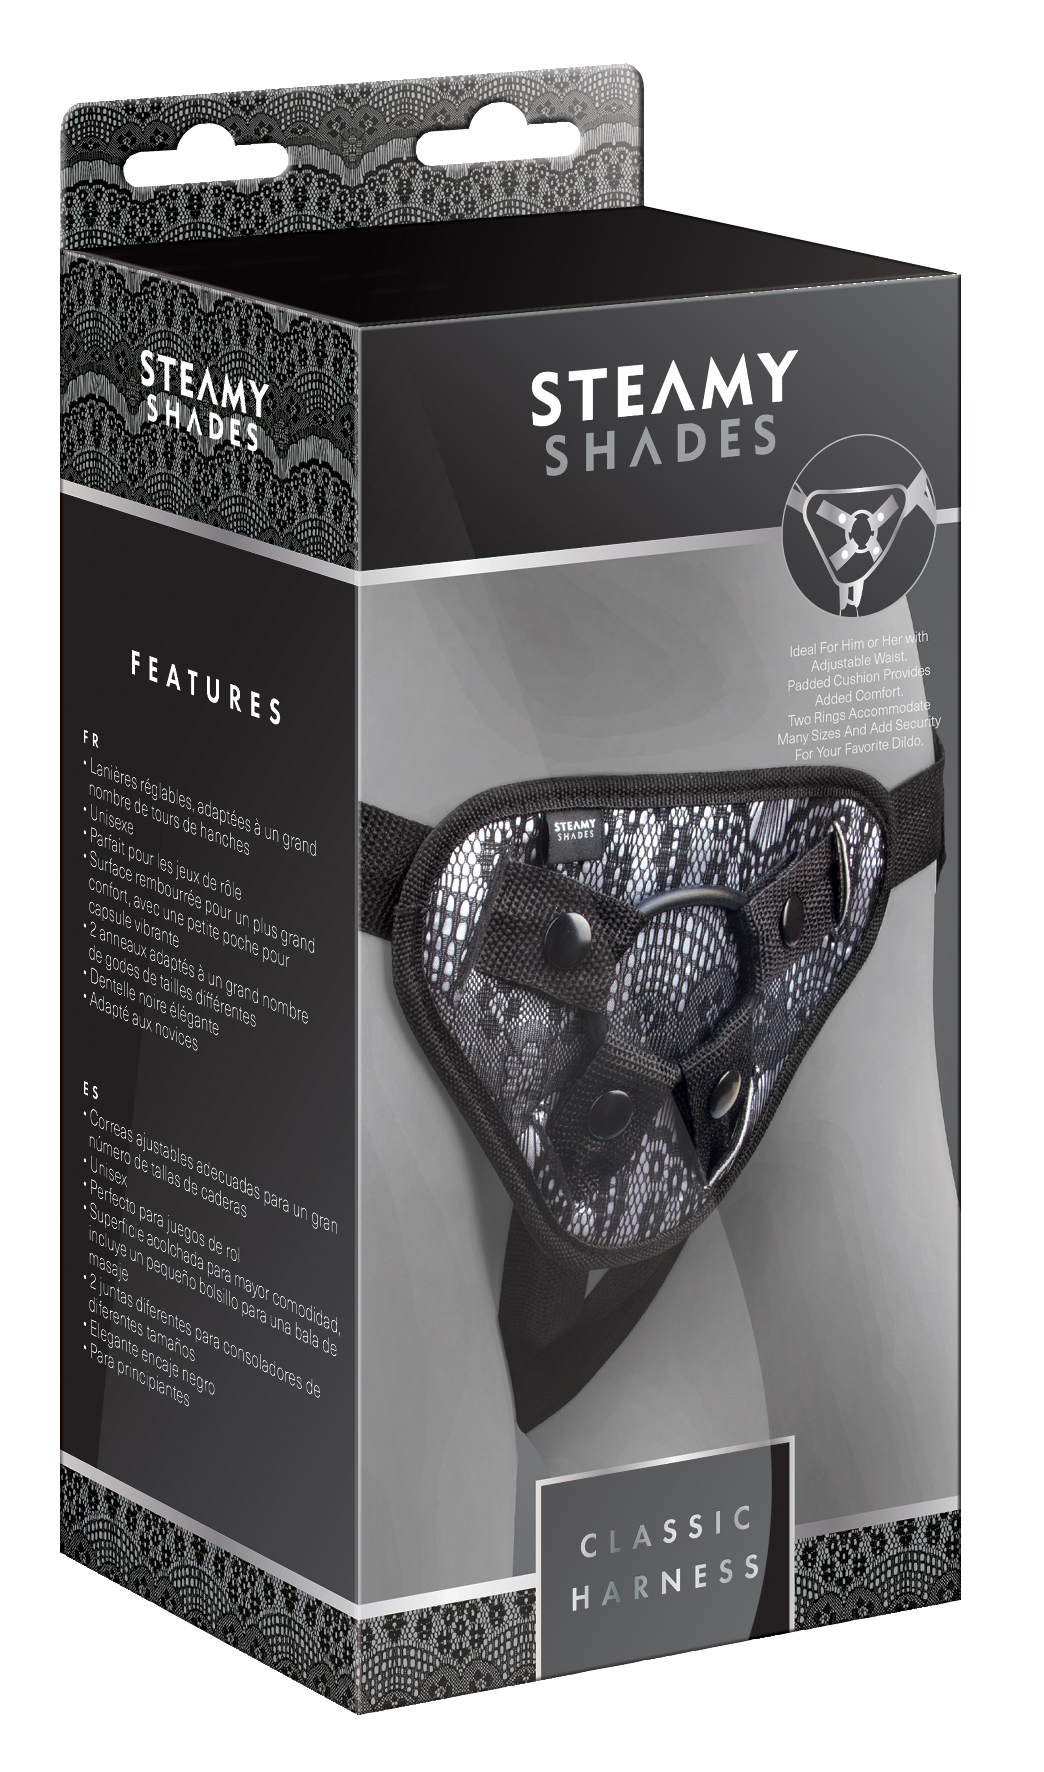 STEAMY SHADES Classic Harness